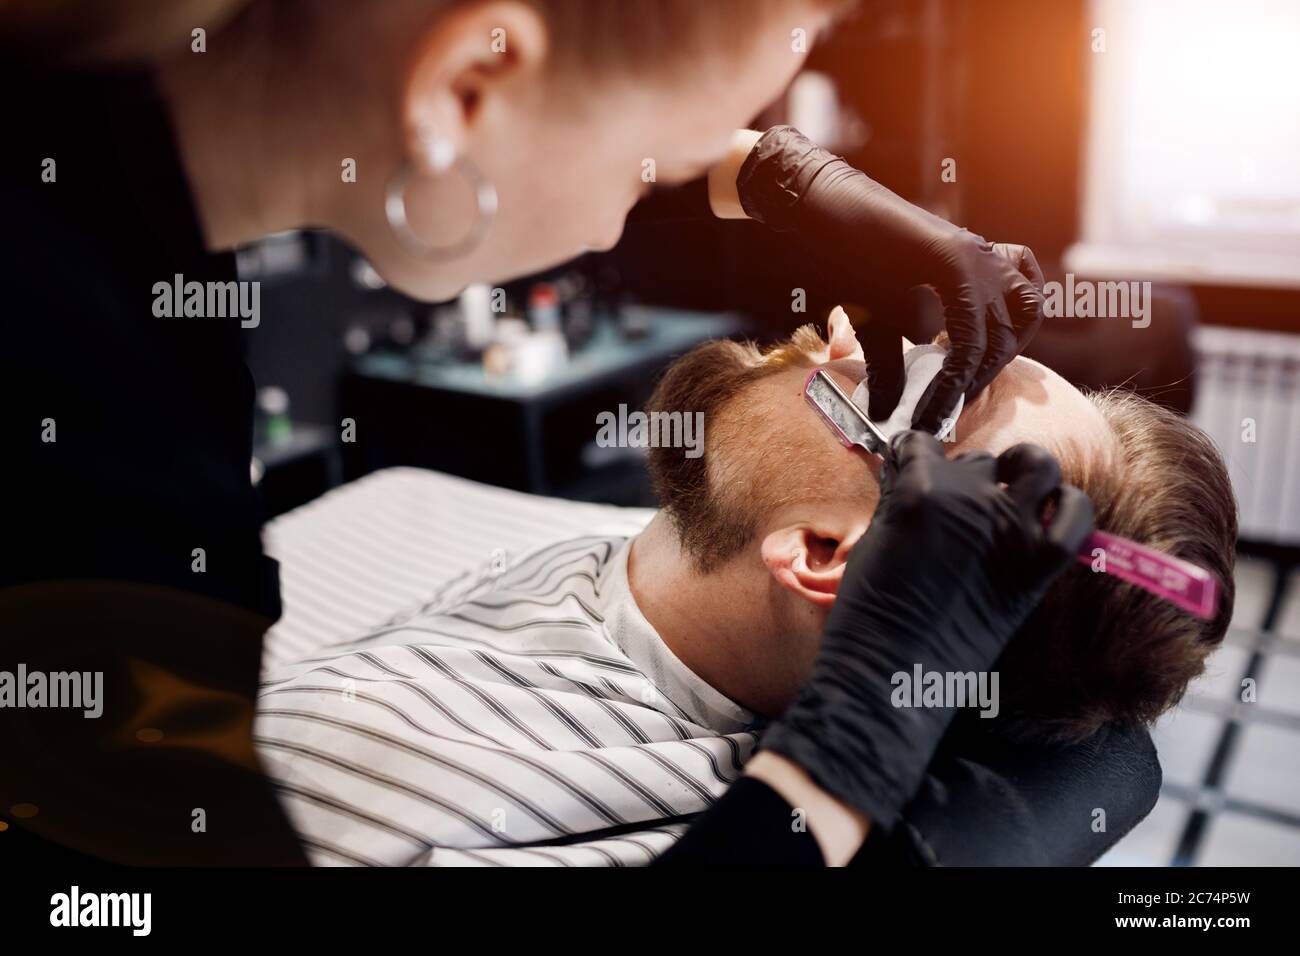 Barber shaving a man in barbershop, close up Stock Photo